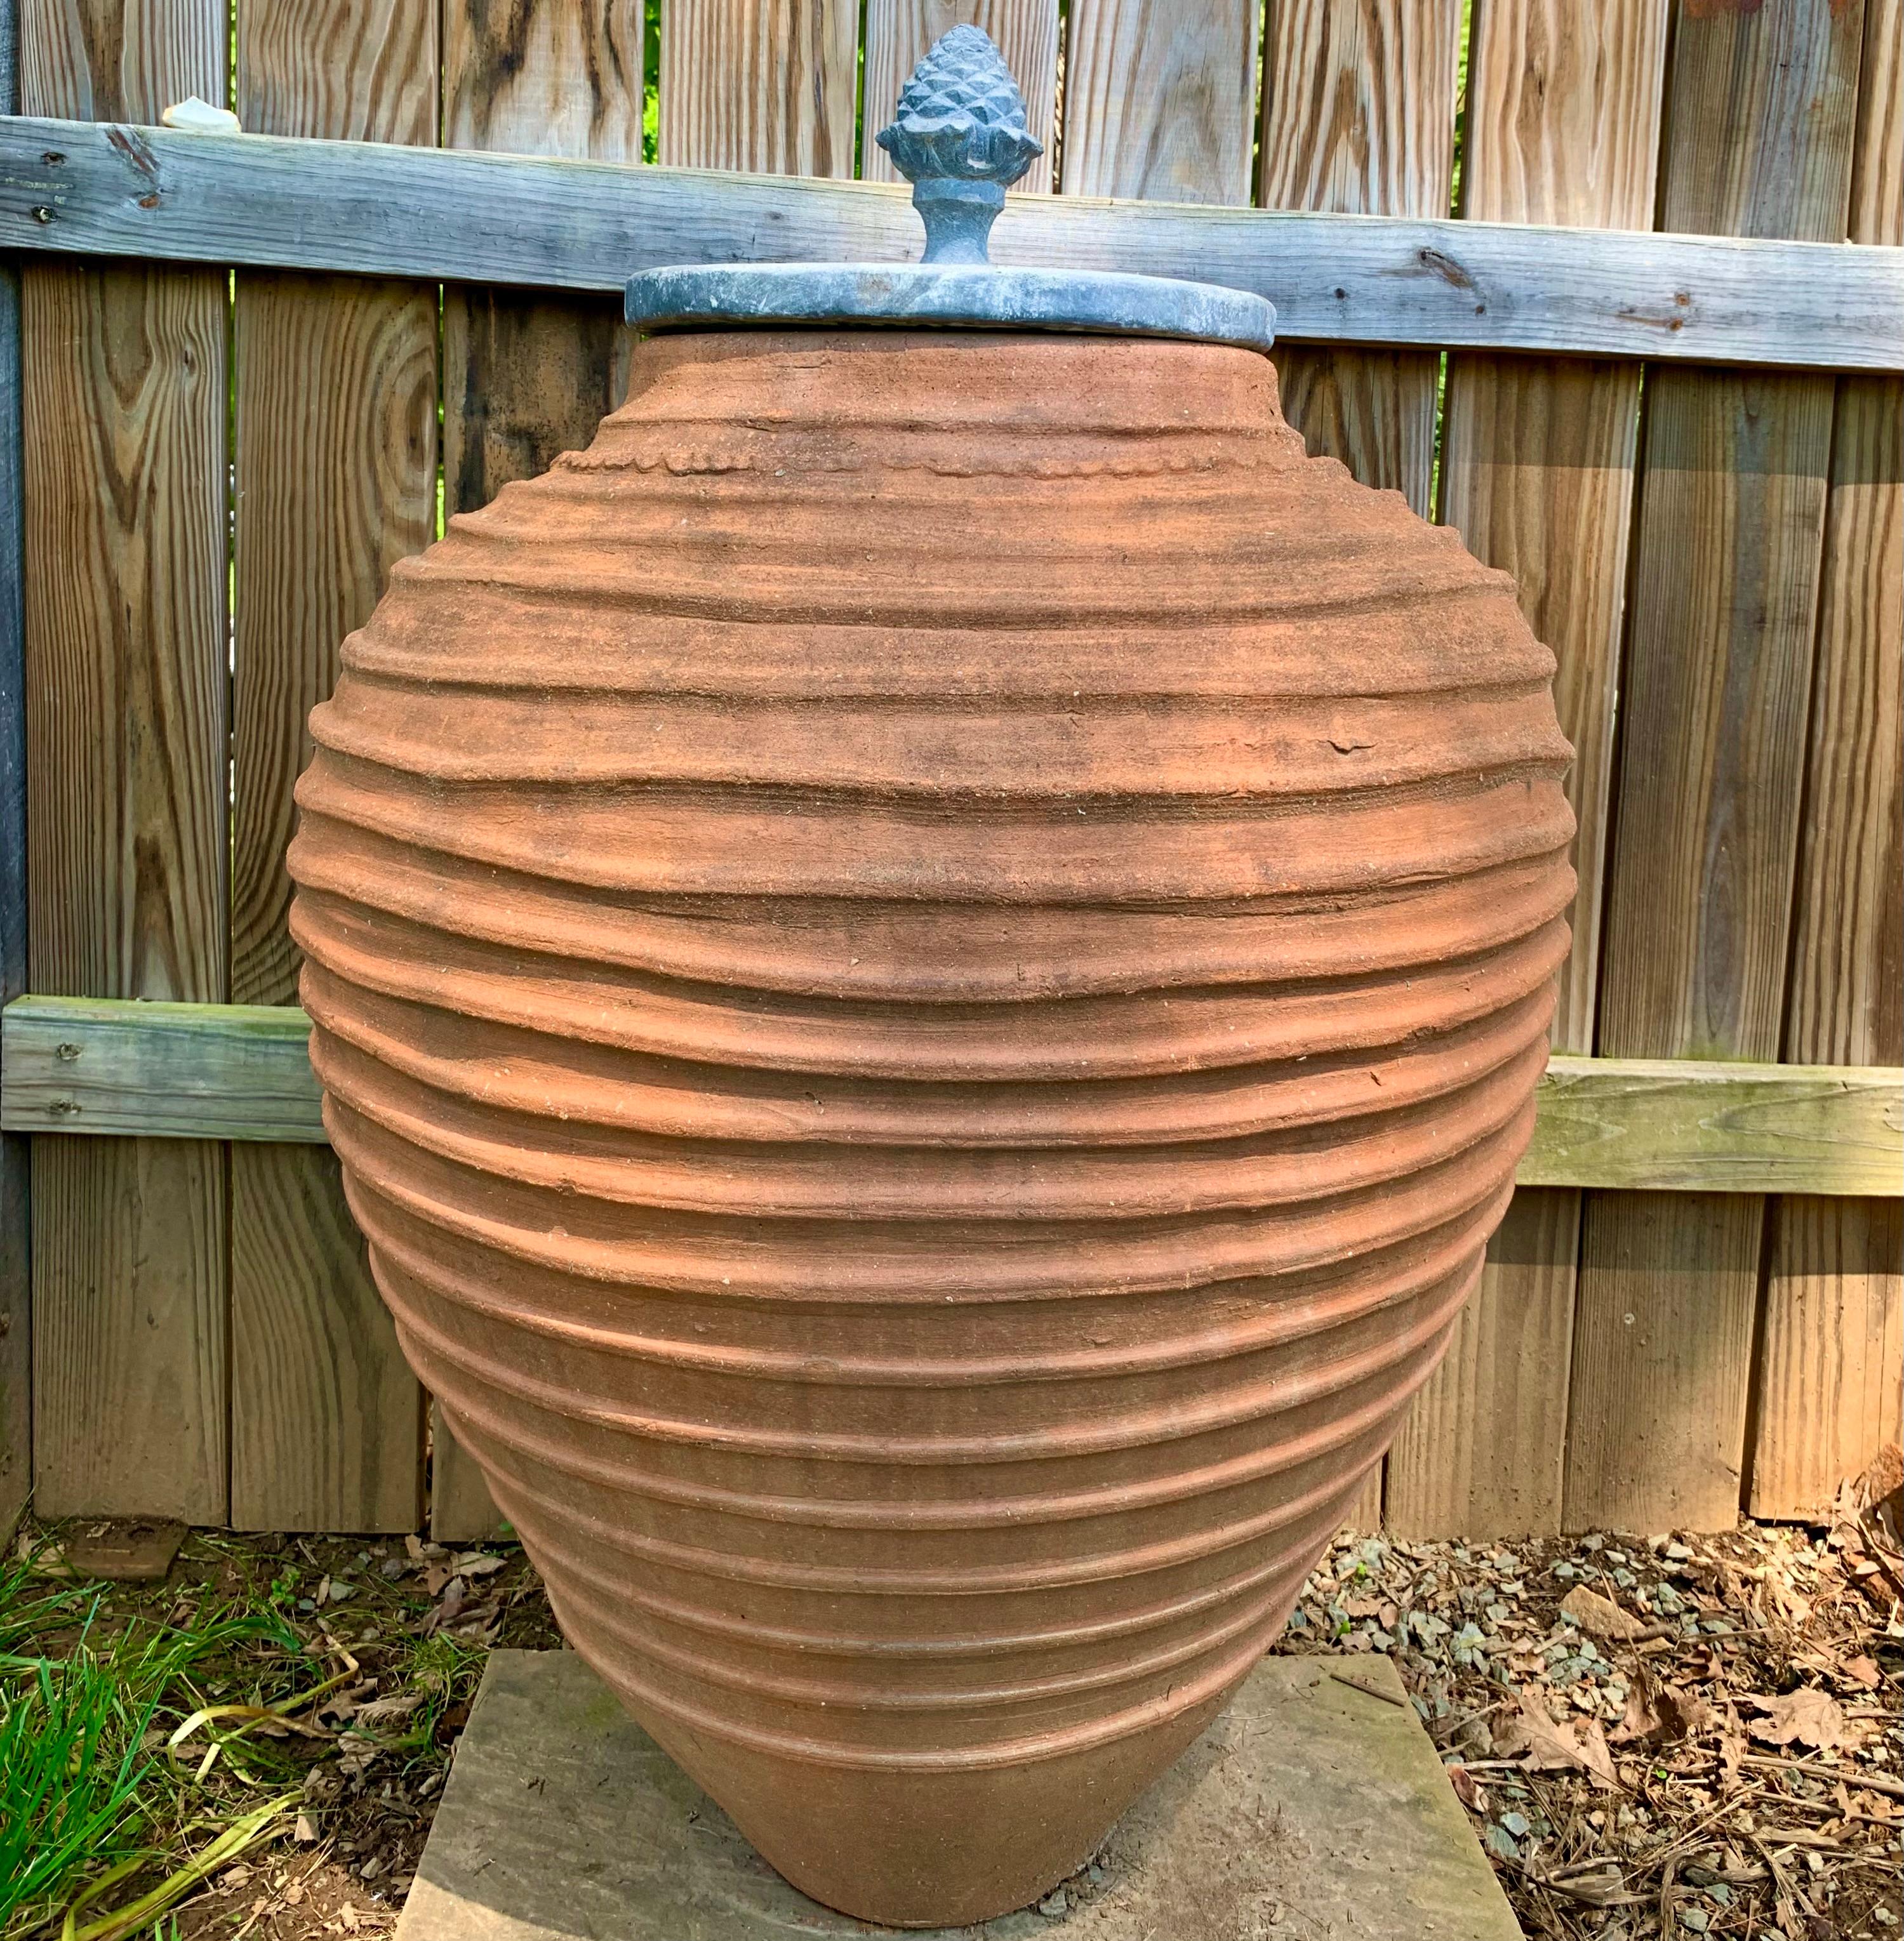 A very large spiral fluted terracotta pot garden ornament, with a tapered and slightly flared neck. The pot is topped by a distinctive ornamental lead cover surmounted by a cast lead acanthus and pinecone finial. 20th century. Flat on the bottom.